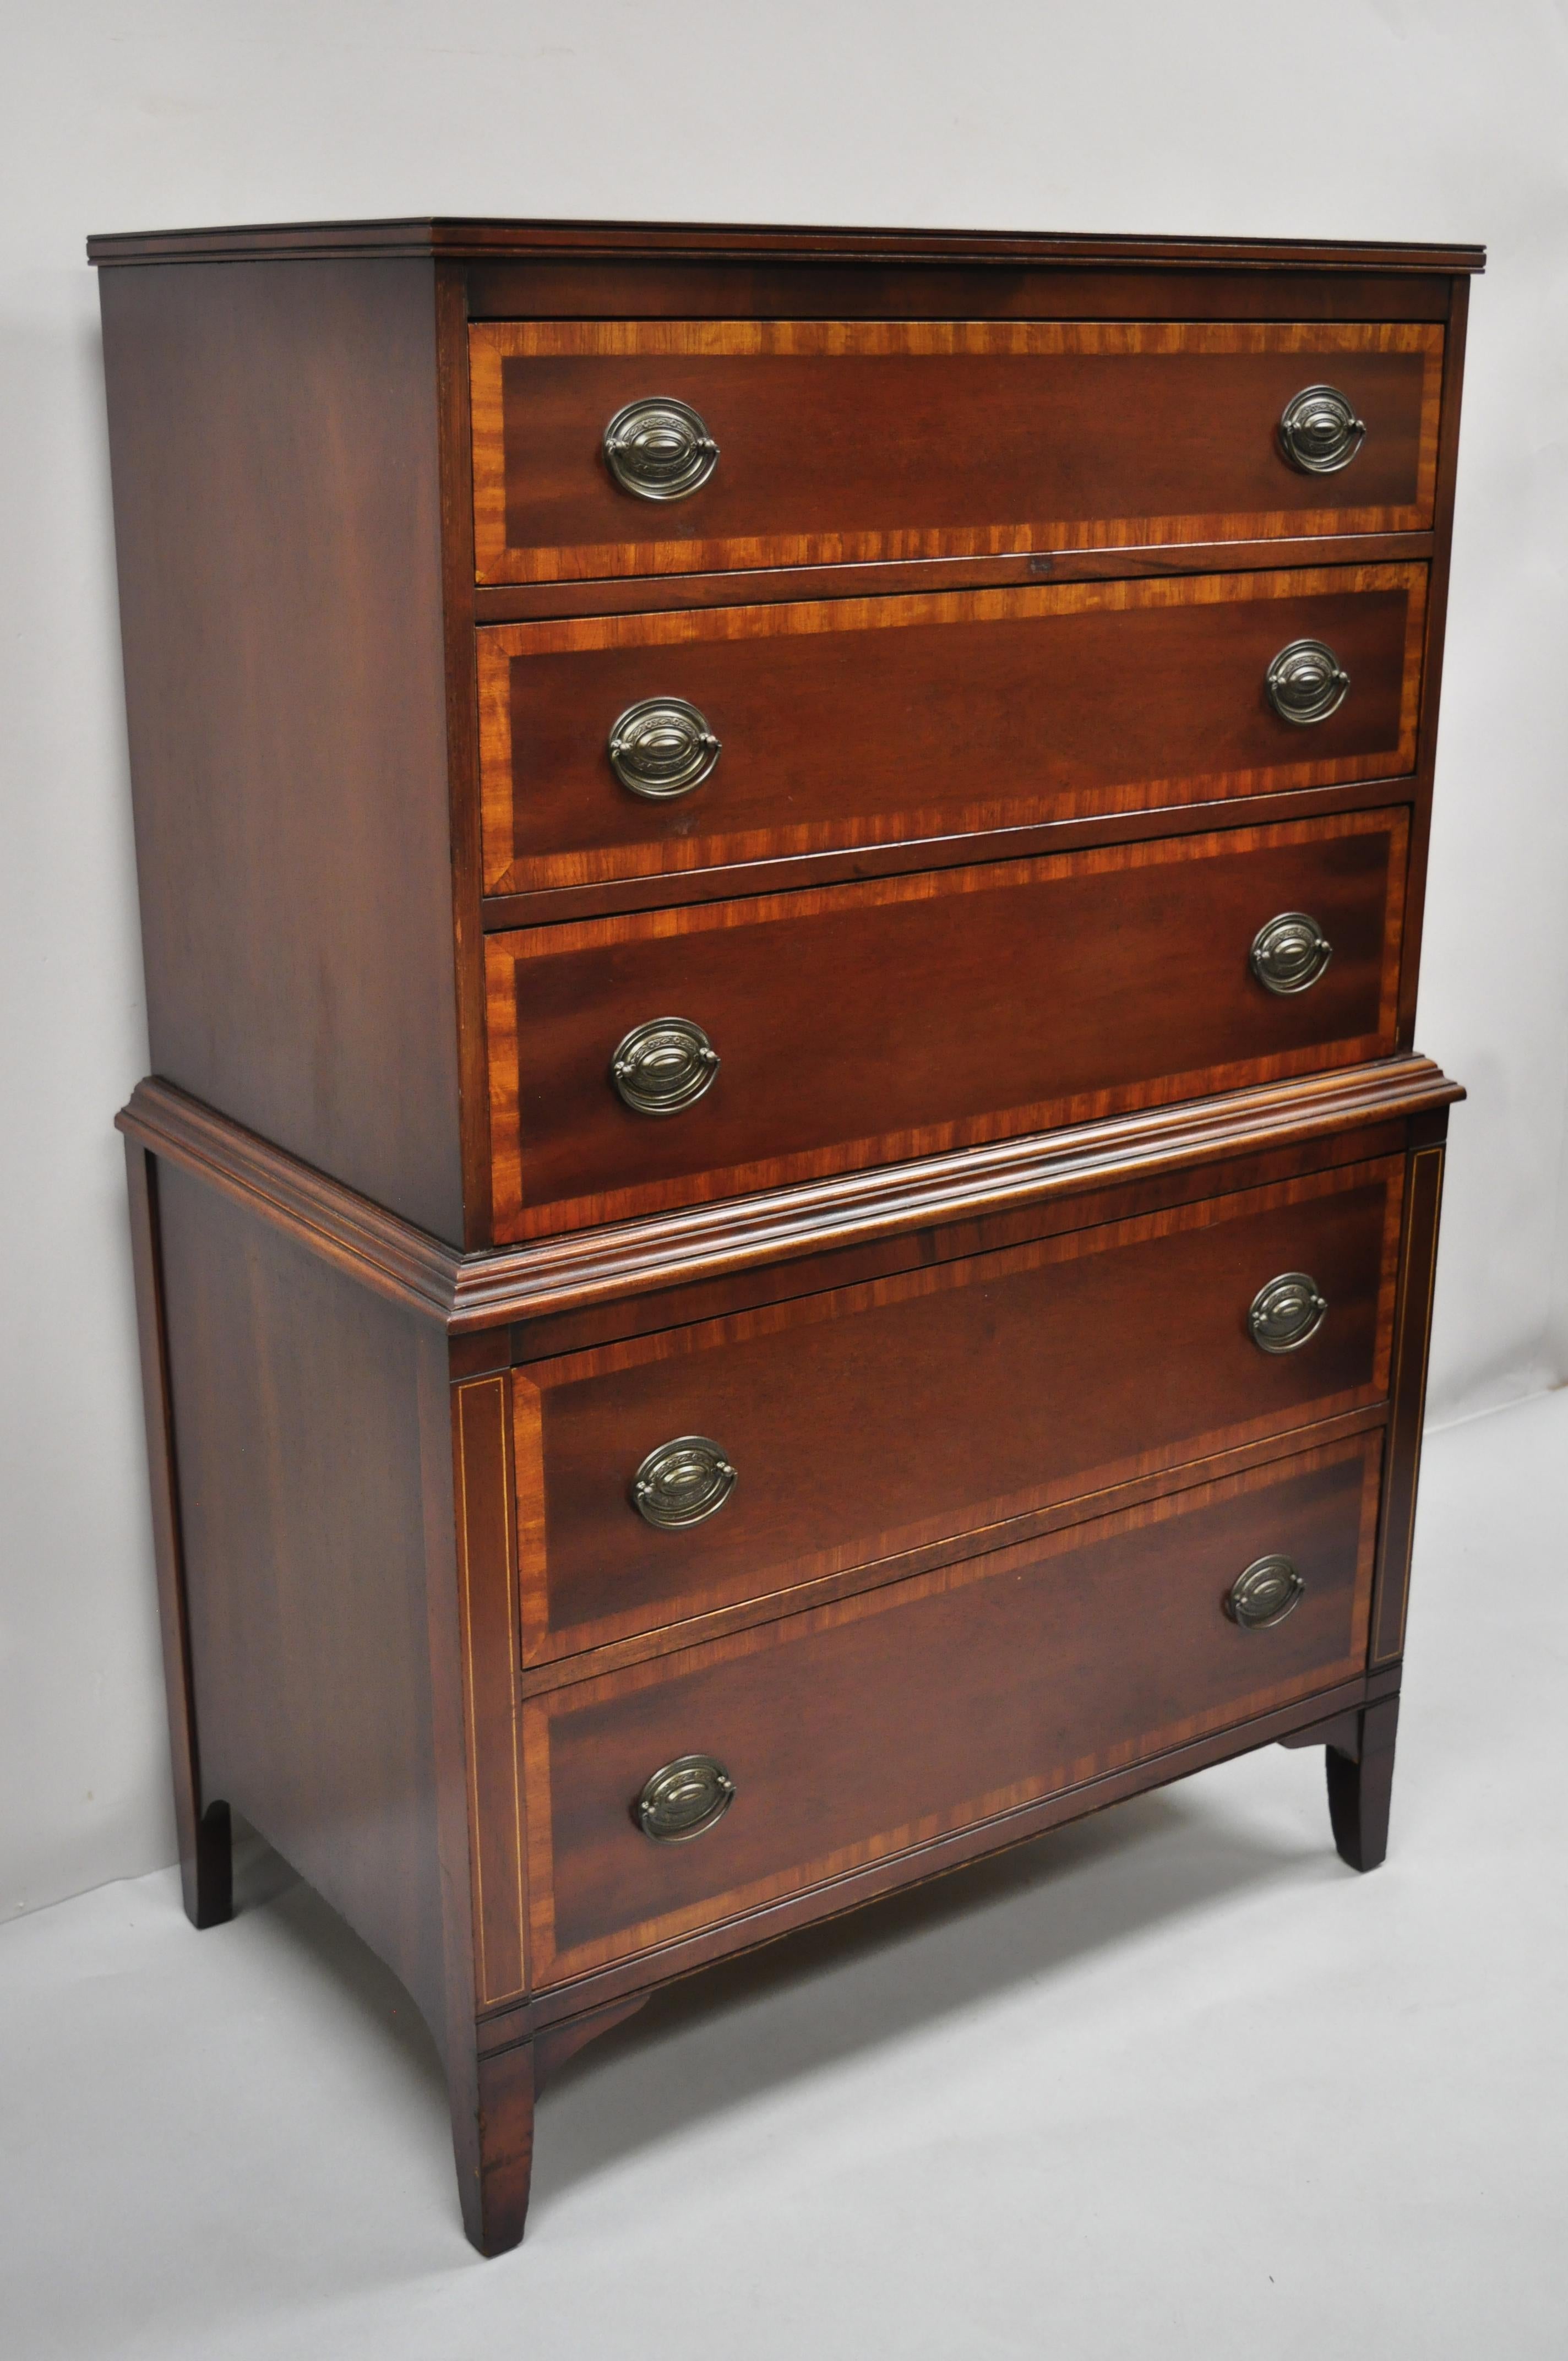 Vintage mahogany 5 drawer banded inlay tall chest dresser highboy by Stiehl. Item features banded inlay drawer fronts, beautiful wood grain, original label, 5 dovetailed drawers, tapered legs, solid brass hardware, quality American craftsmanship.